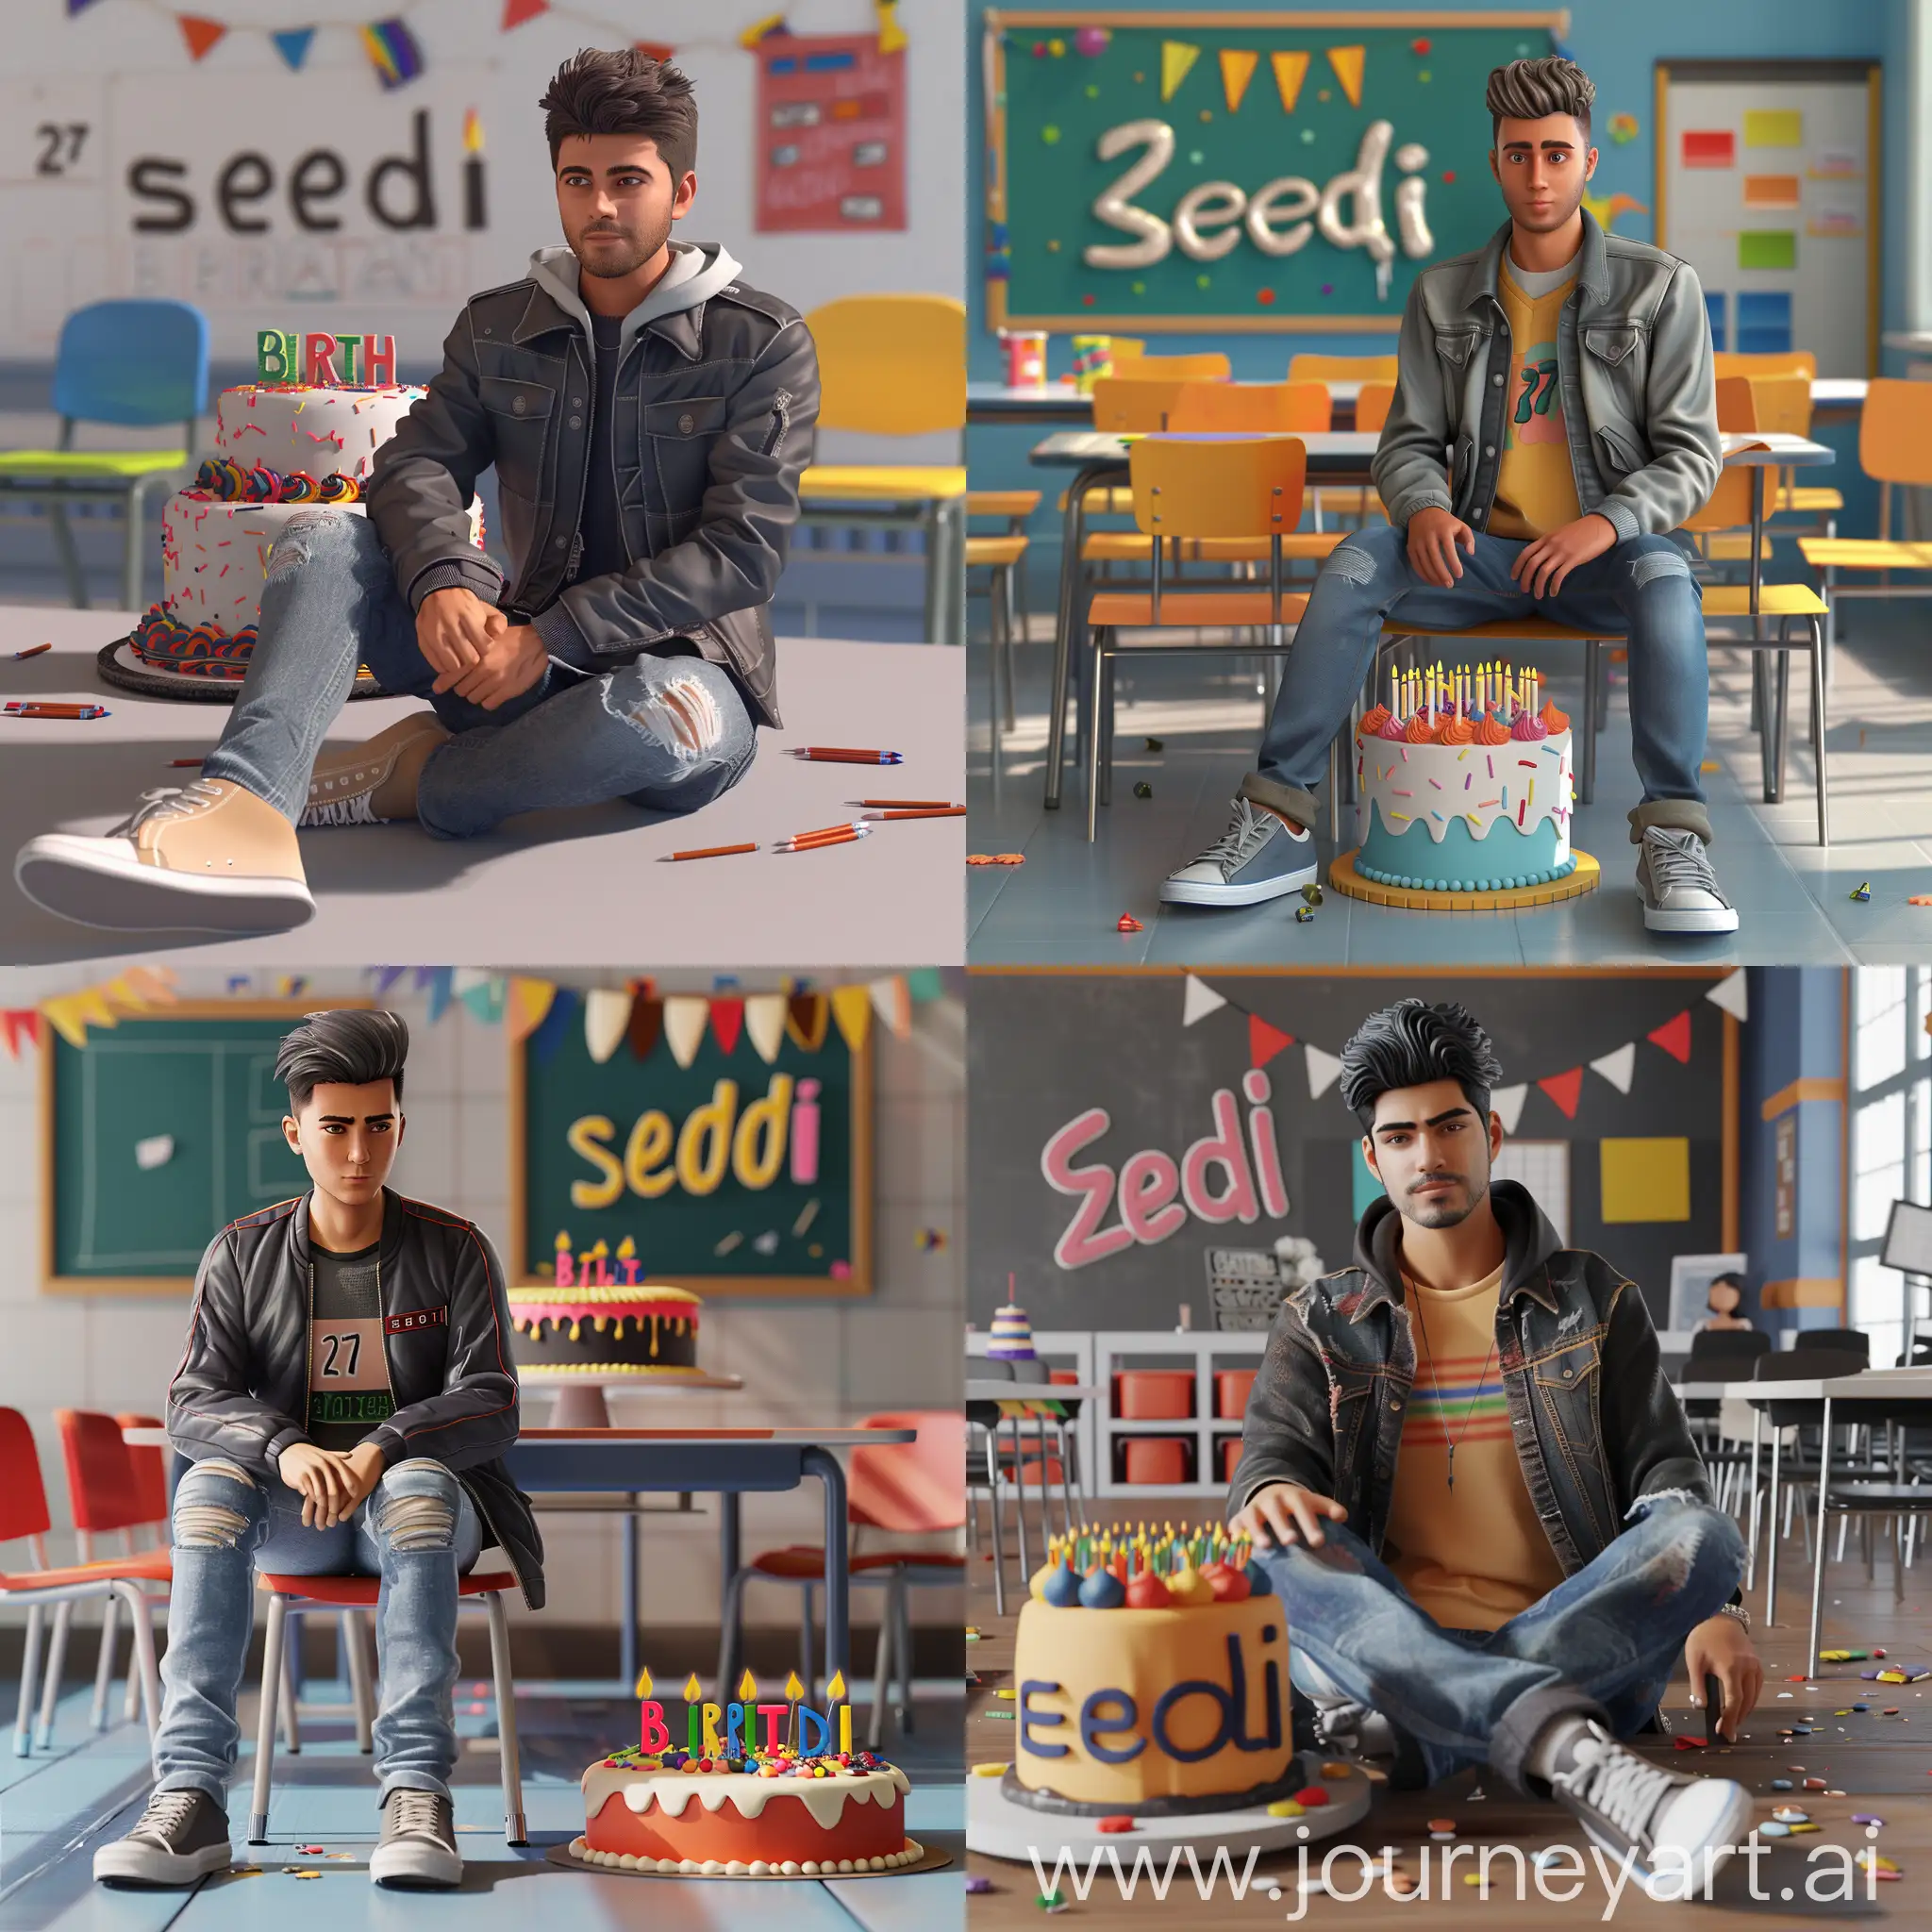 Create a 3D illustration of a man of age 27 years sitting casually in front of a birthday cake. The character must wear casual modern clothing such as jeans, jackets and sneakers shoes. The background of the image is a classroom theme on the occasion of a birthday. Write seedi on the birthday cake and make sure the text is not misspelt.